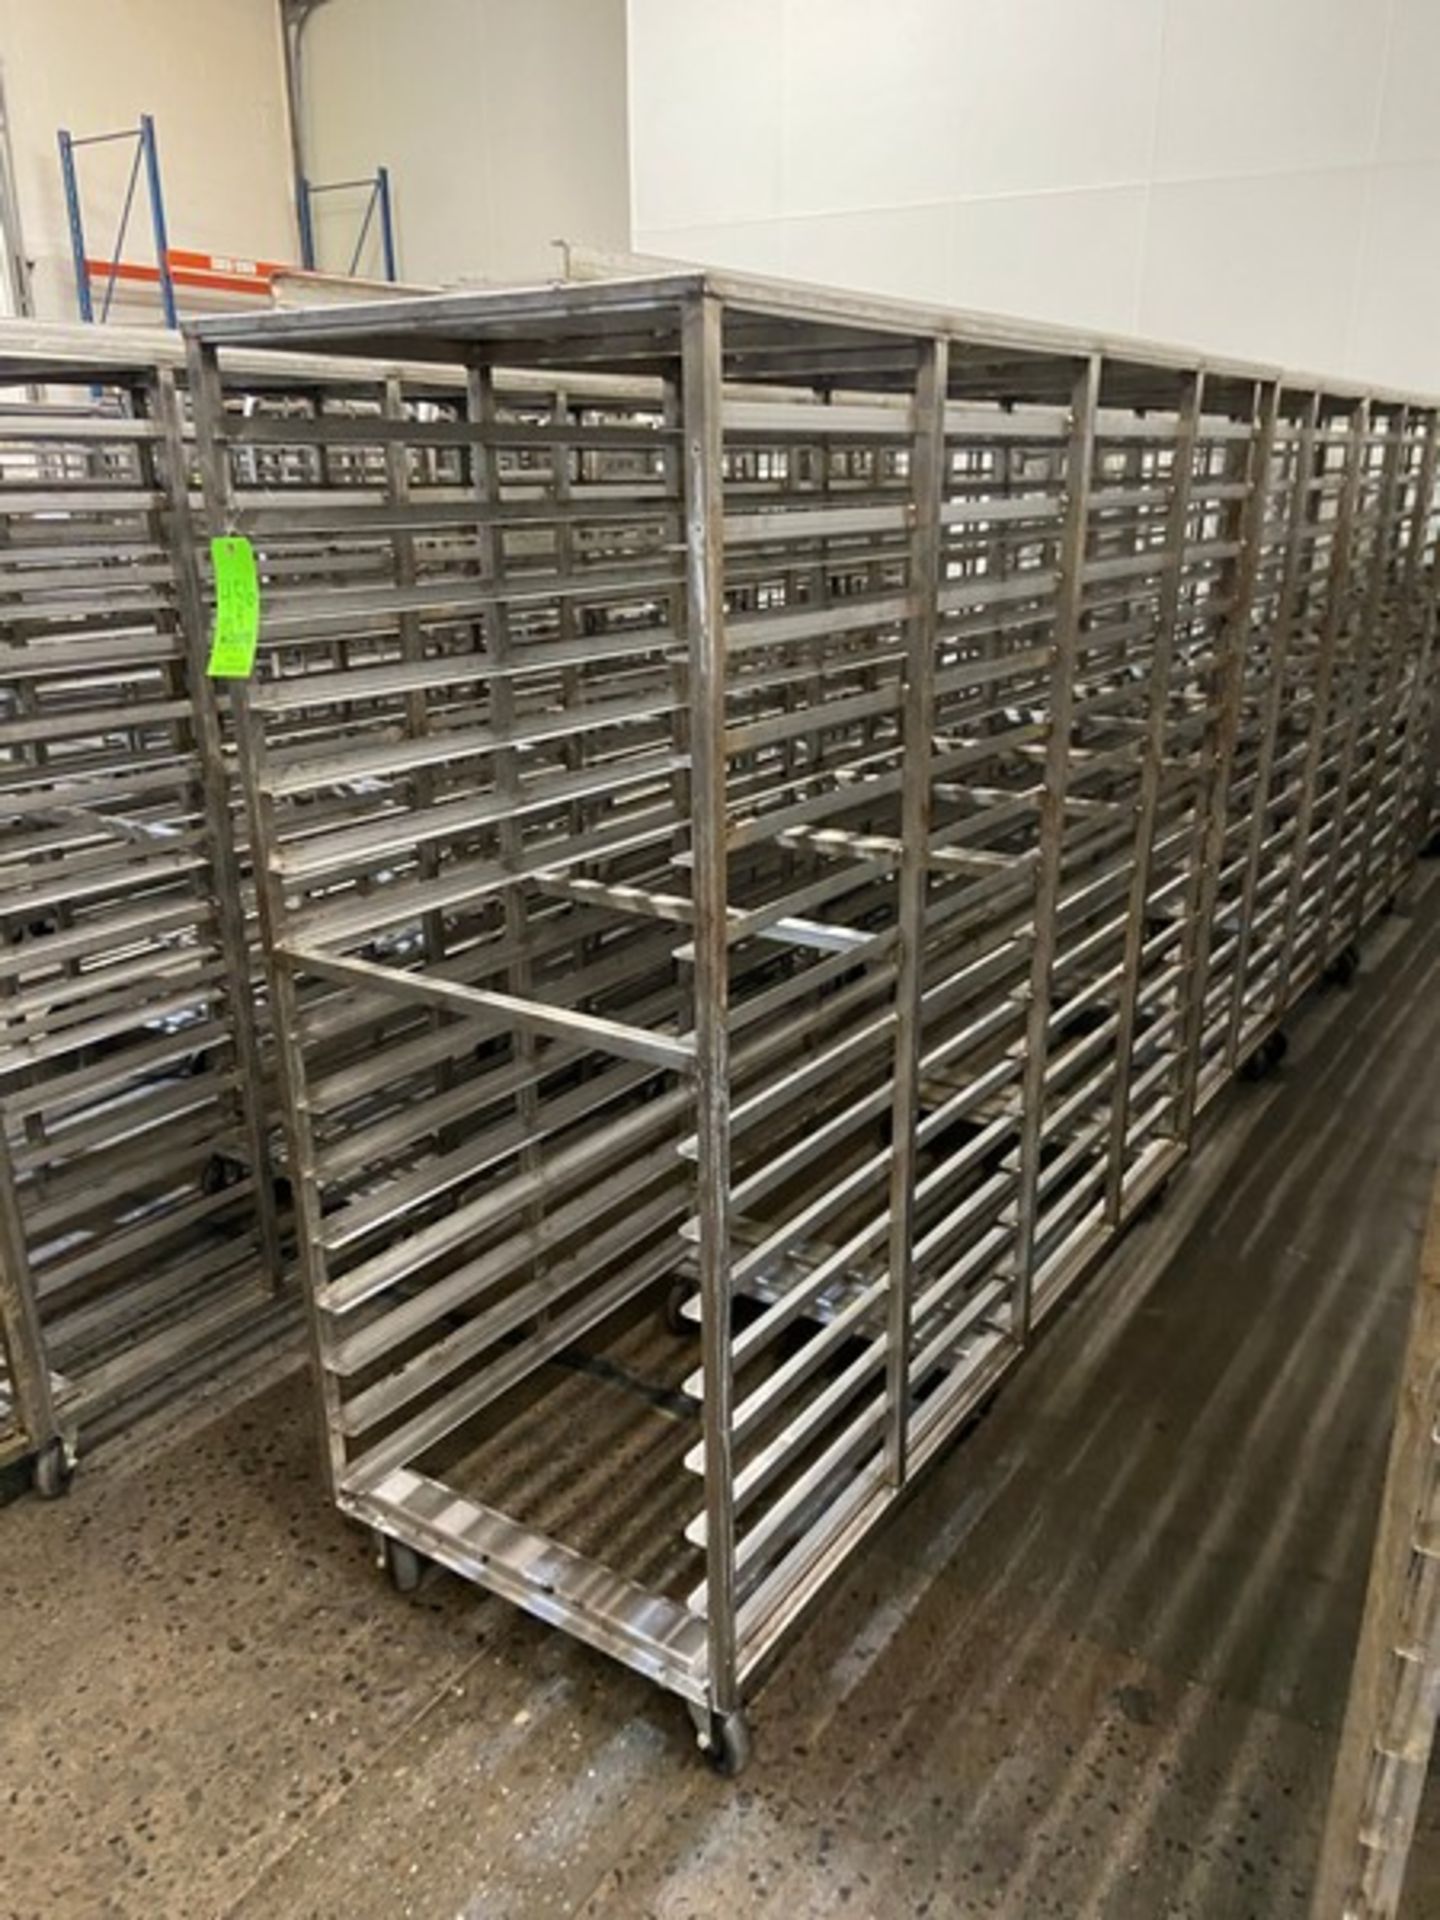 (9) BAKING PAN RACKS, MOUNTED ON CASTERS (LOCATED IN CALLERY, PA)